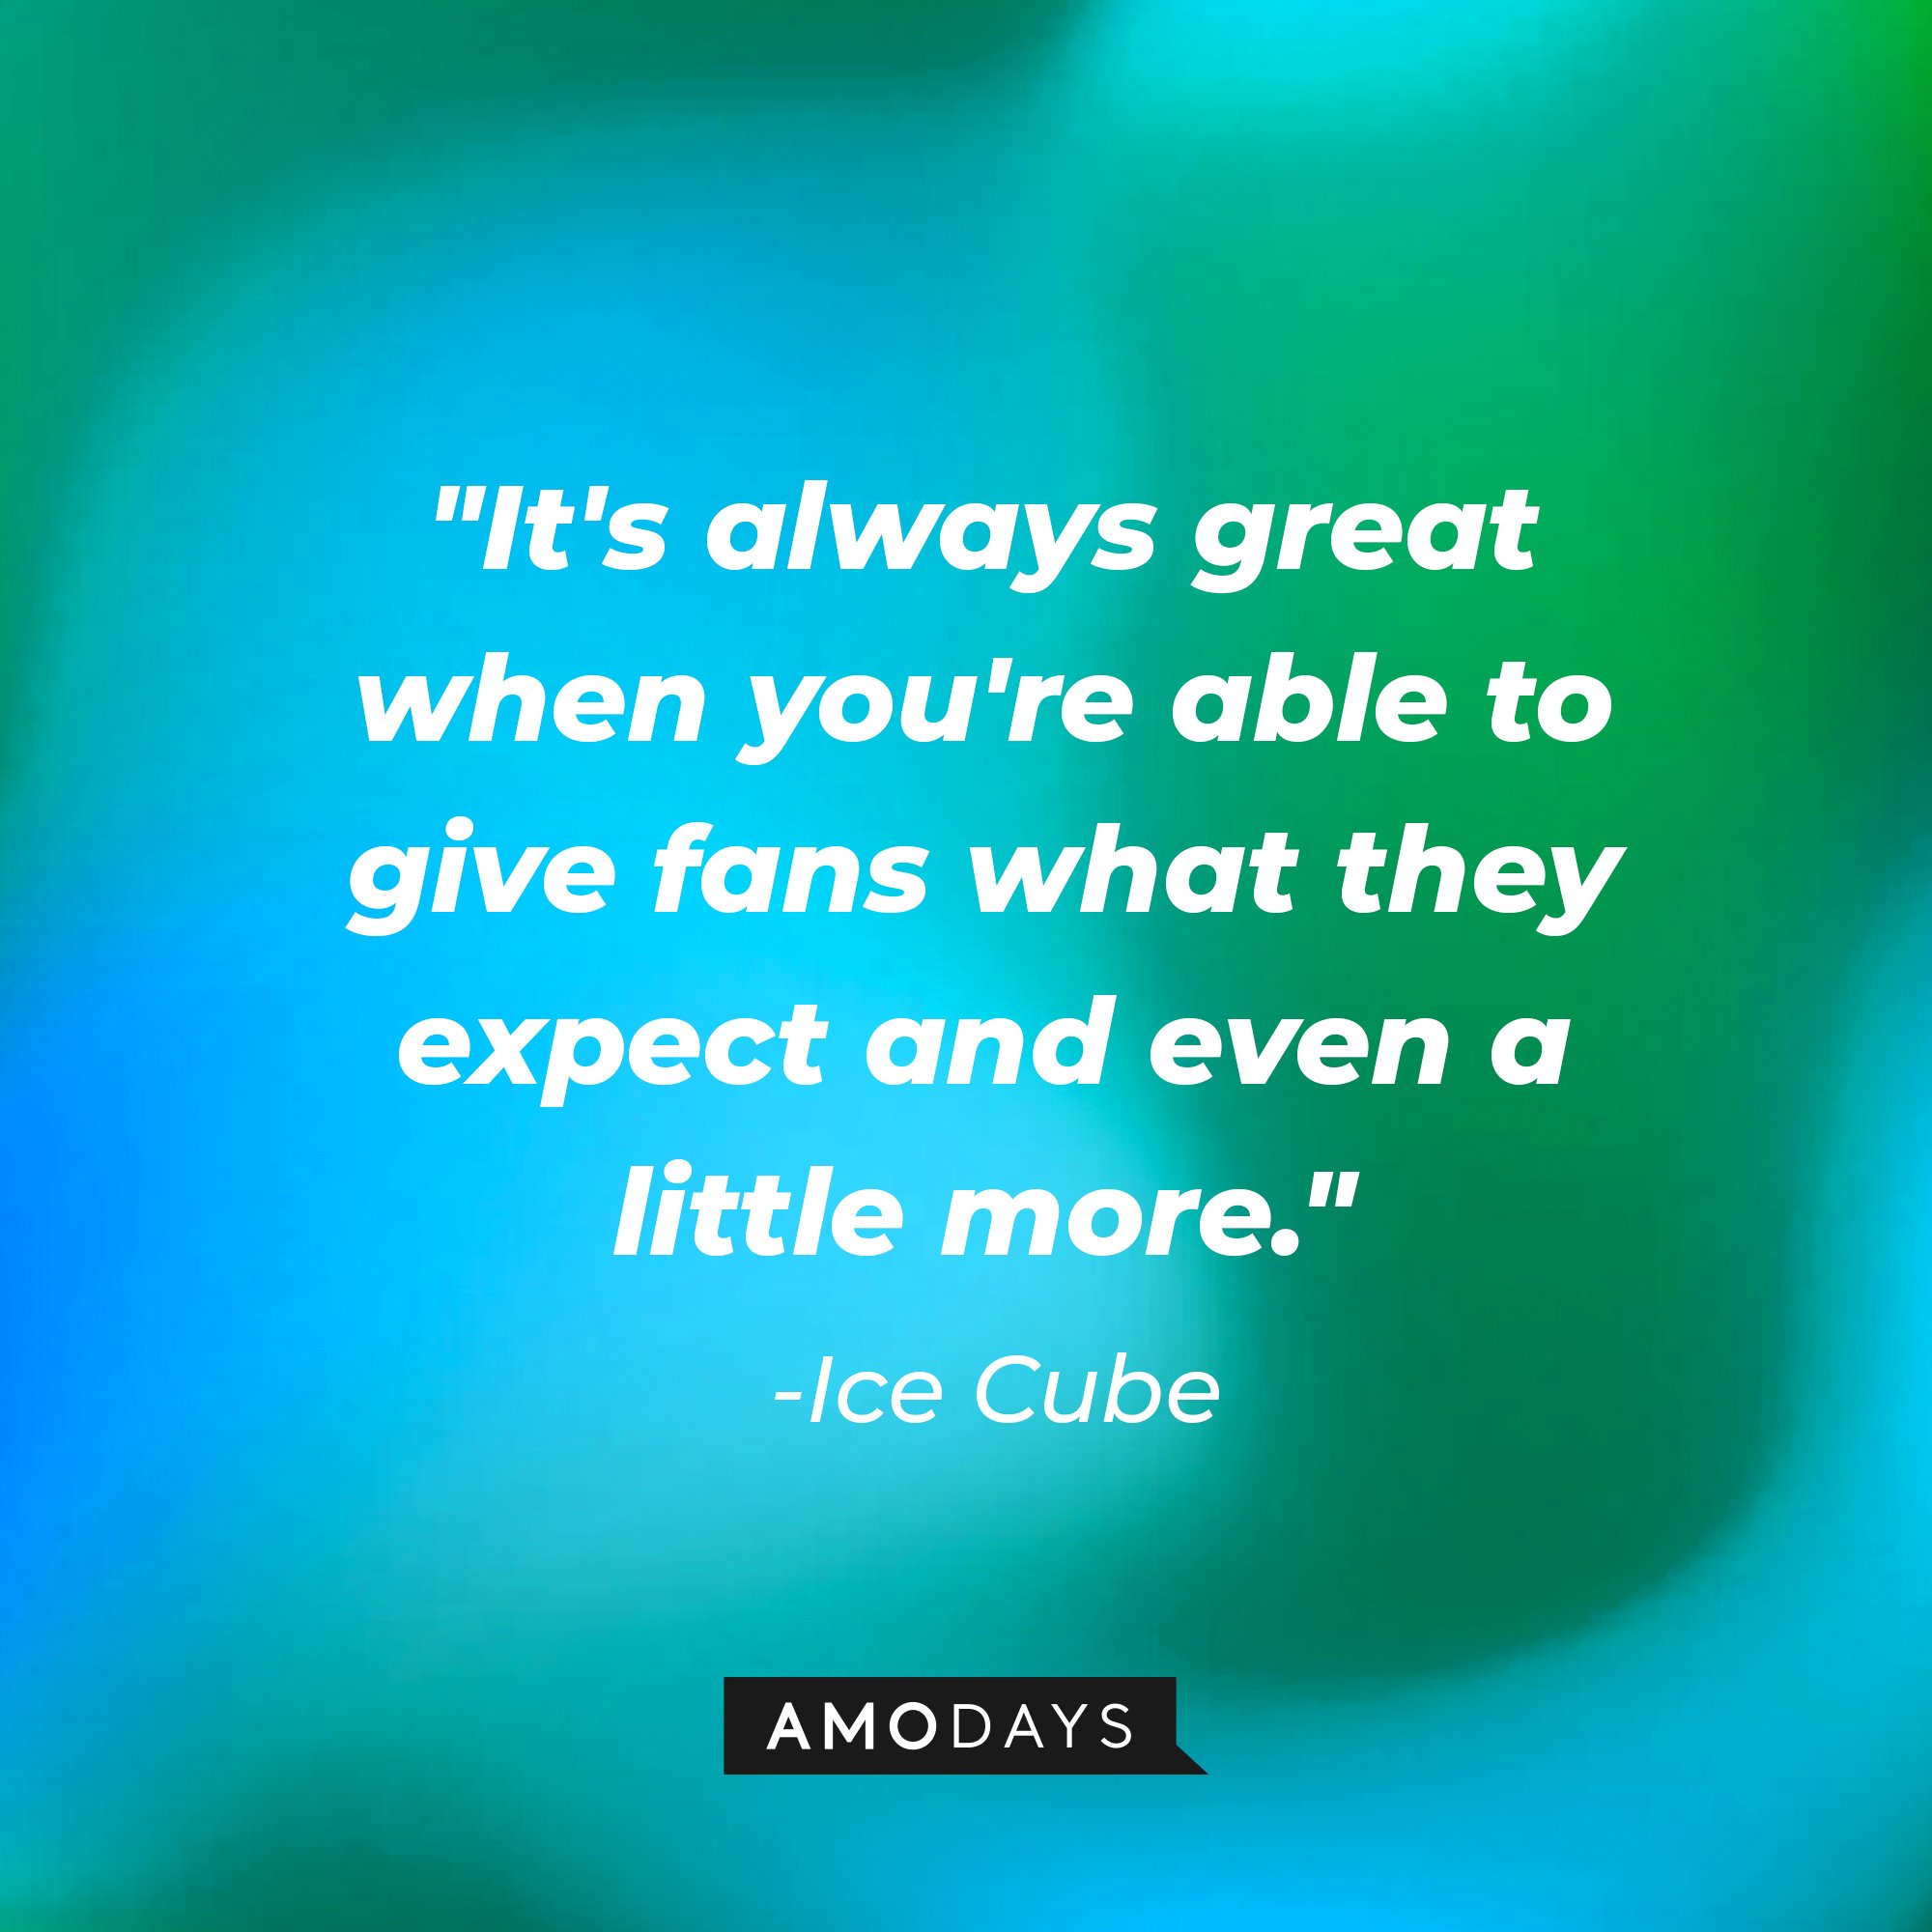 Ice Cube's quote: "It's always great when you're able to give fans what they expect and even a little more." — Ice Cube | Image: AmoDays